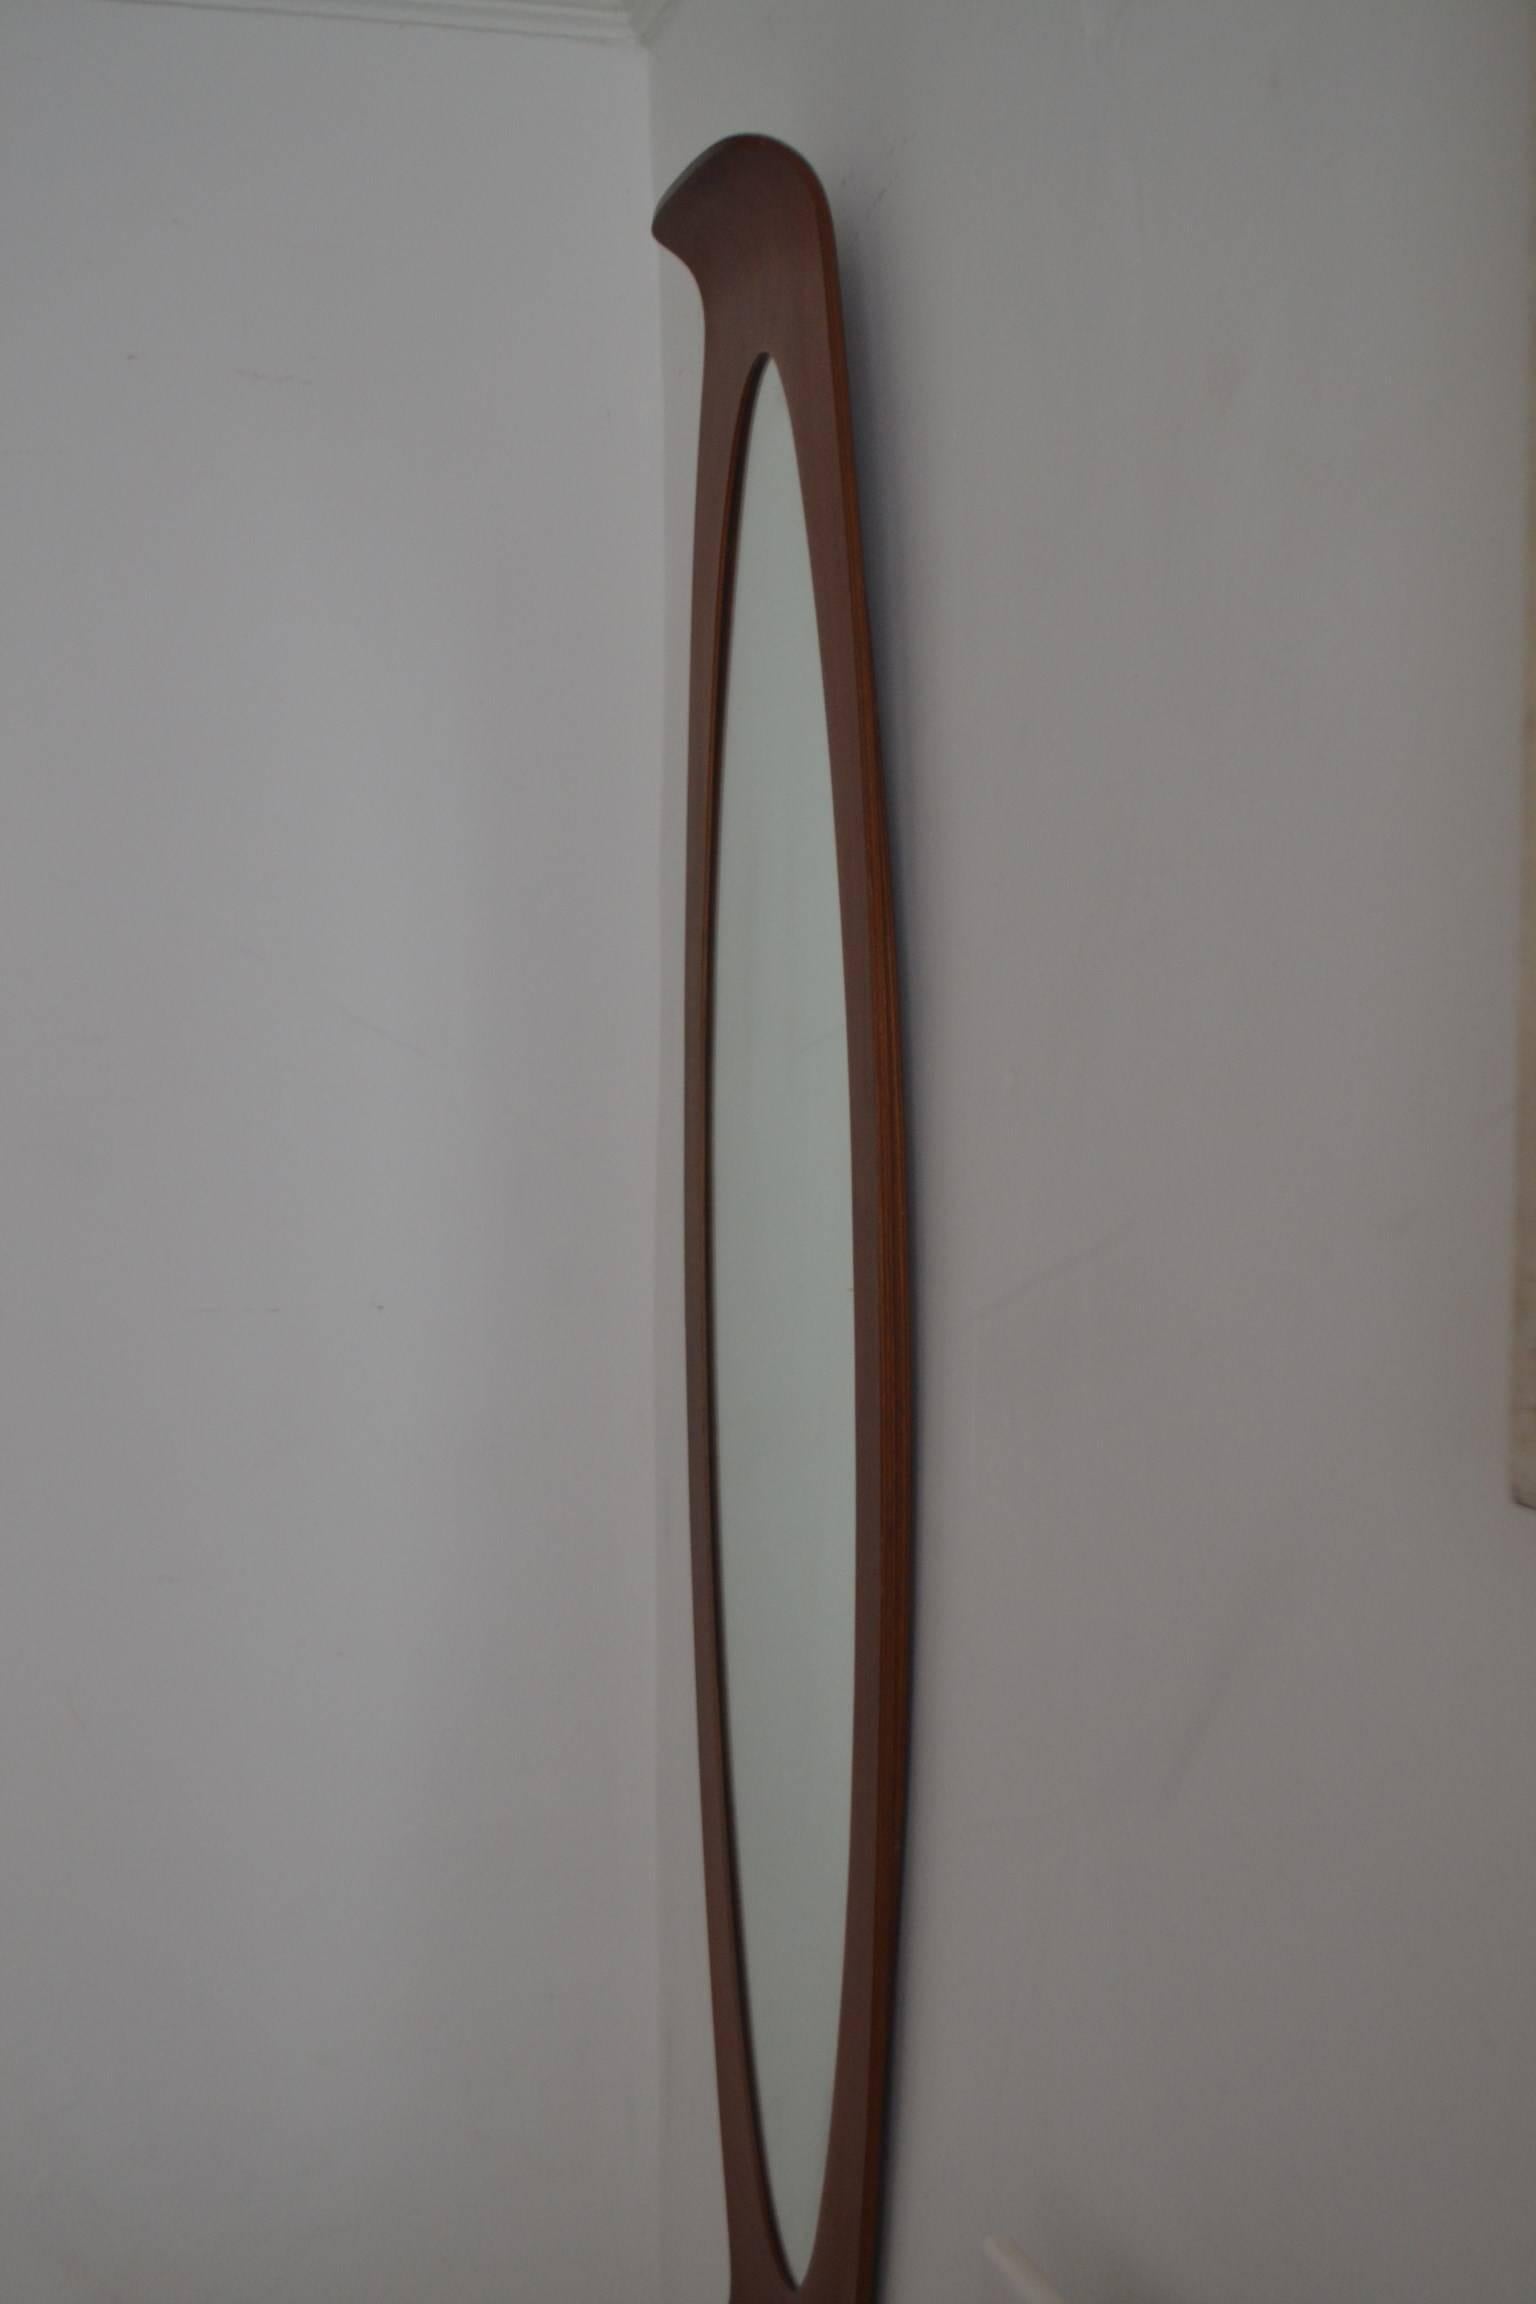 Bentwood teak wall mirror designed by Franco Campo and Carlo Graffi for Home, Italy.